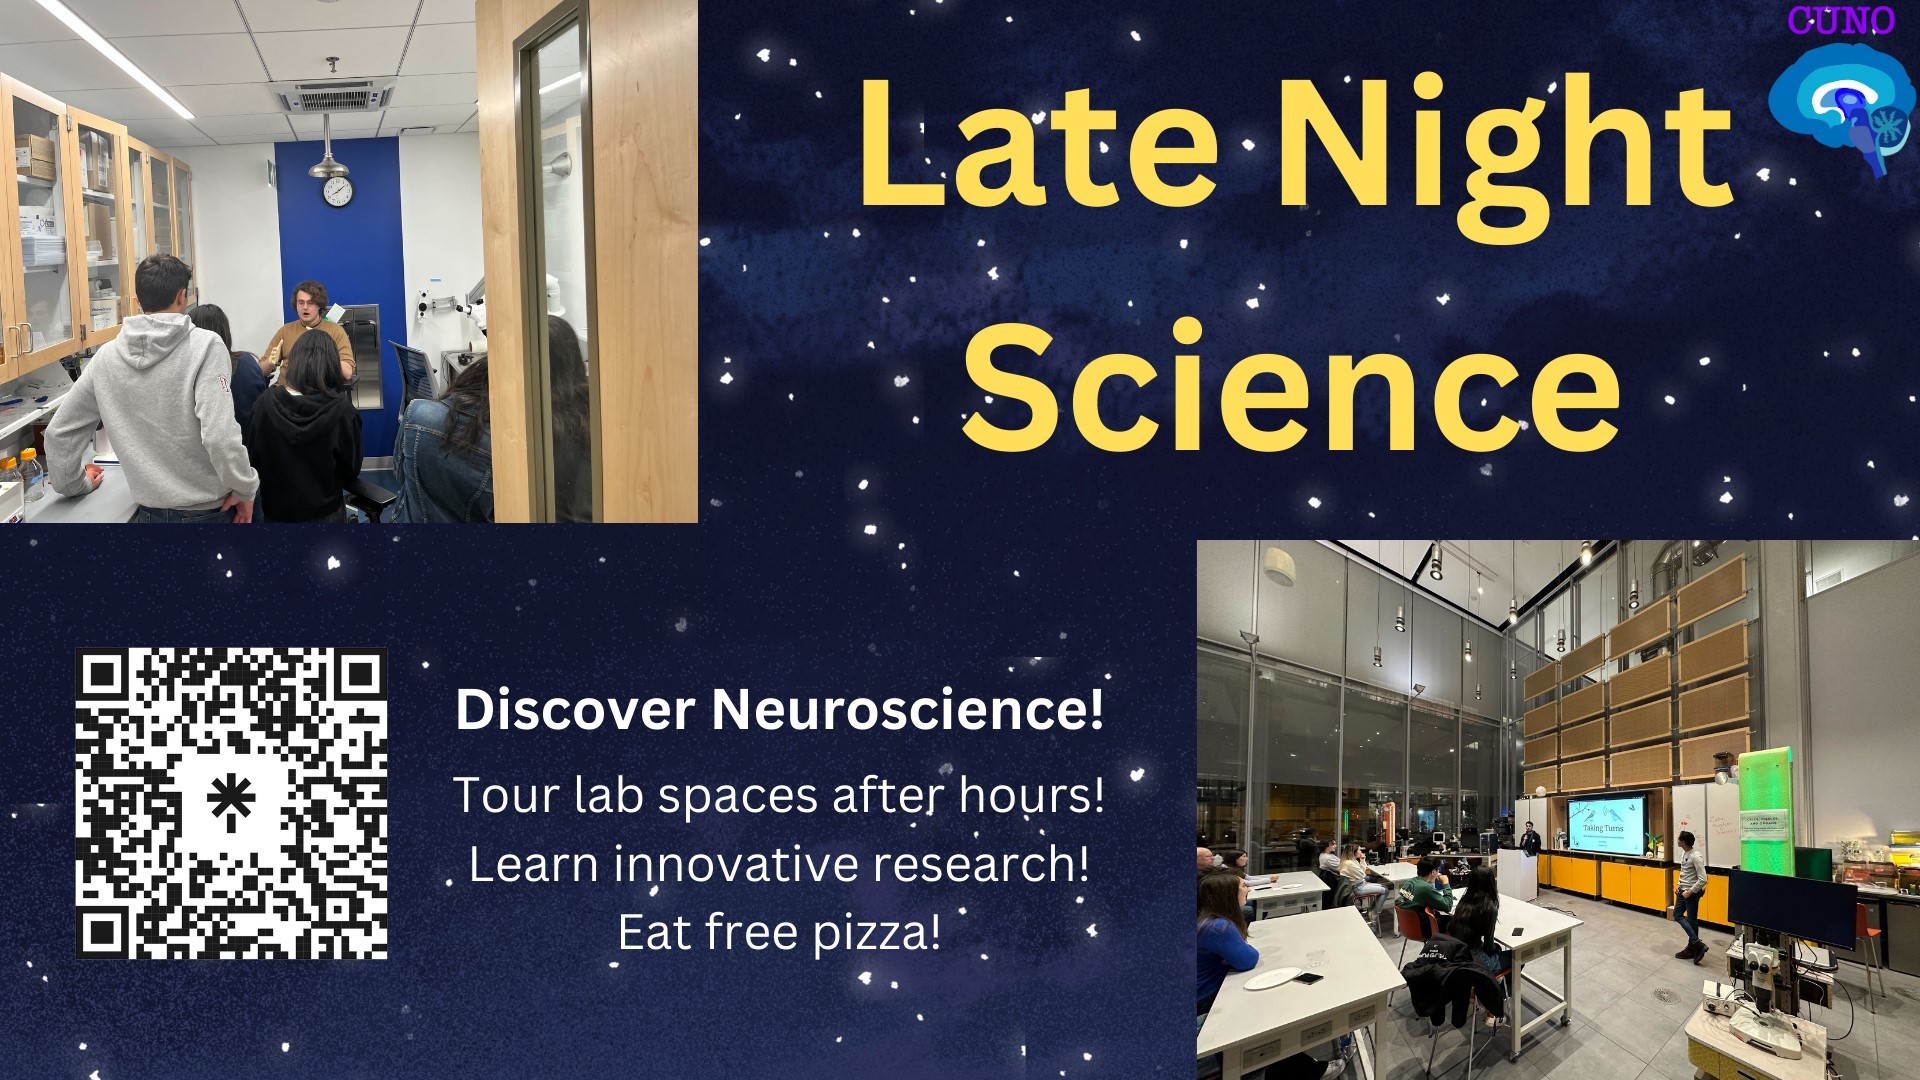 Late night science poster